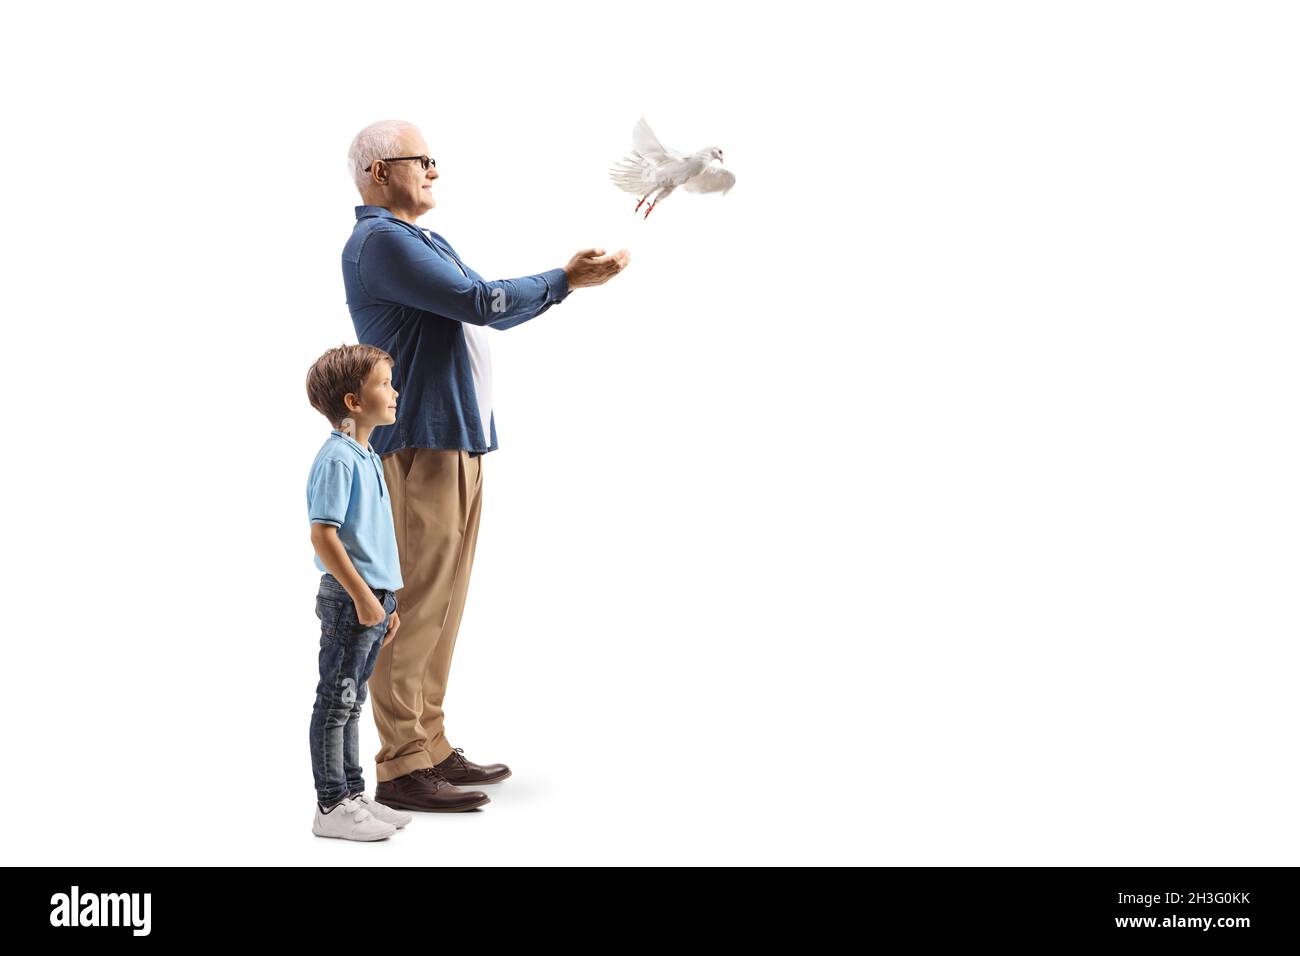 Full length profile shot of a man and a boy letting a white dove fly isolated on white background Stock Photo